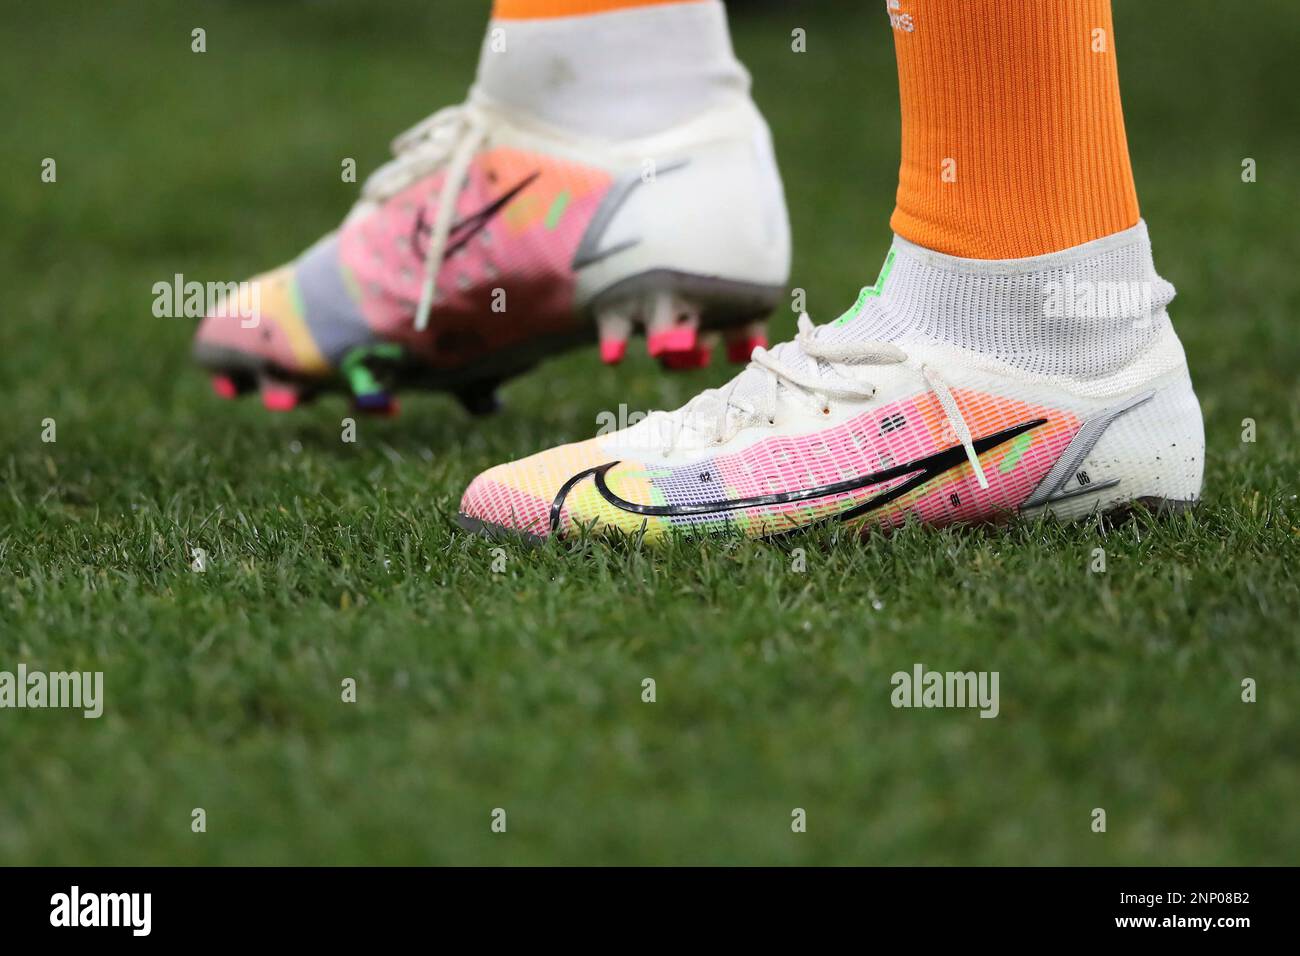 Cristiano Ronaldo of Juventus's new Nike Mercurial football boots are seen  during the warm up prior to the Serie A match at Luigi Ferraris, Genoa.  Picture date: 30th January 2021. Picture credit